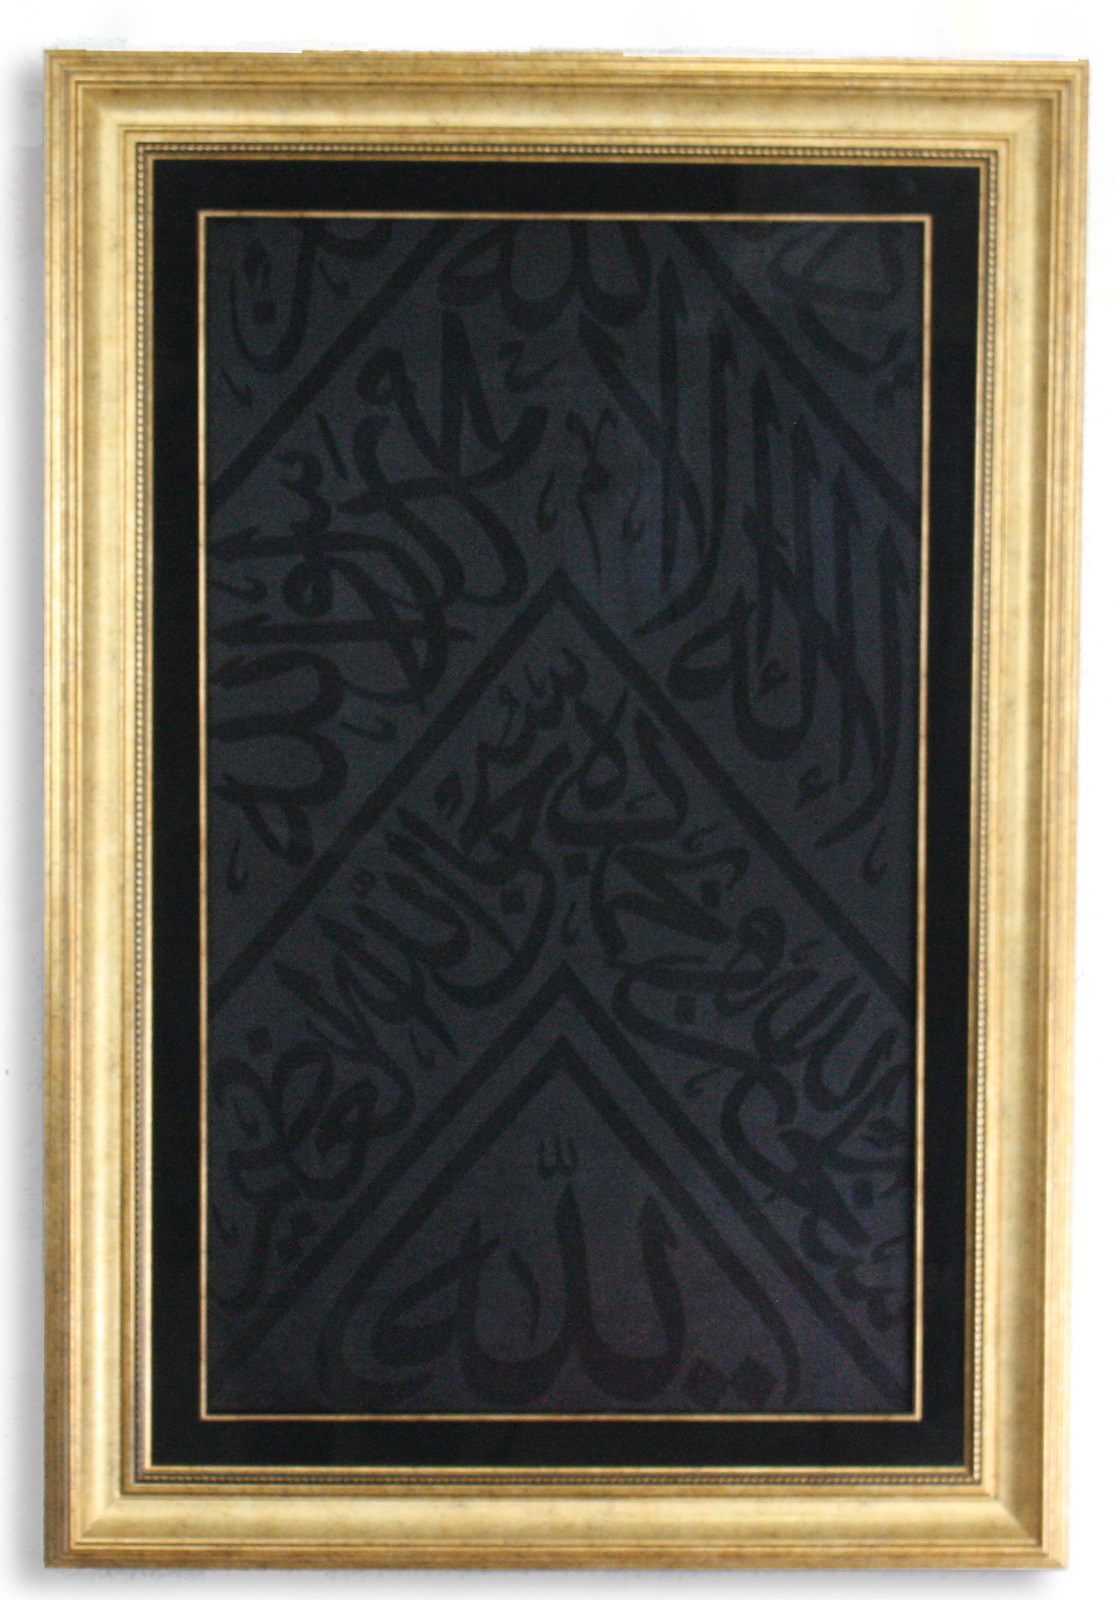 Authentic certified Holy Kaaba Black Cover fragment FRAMED Kiswa Of The Kaaba